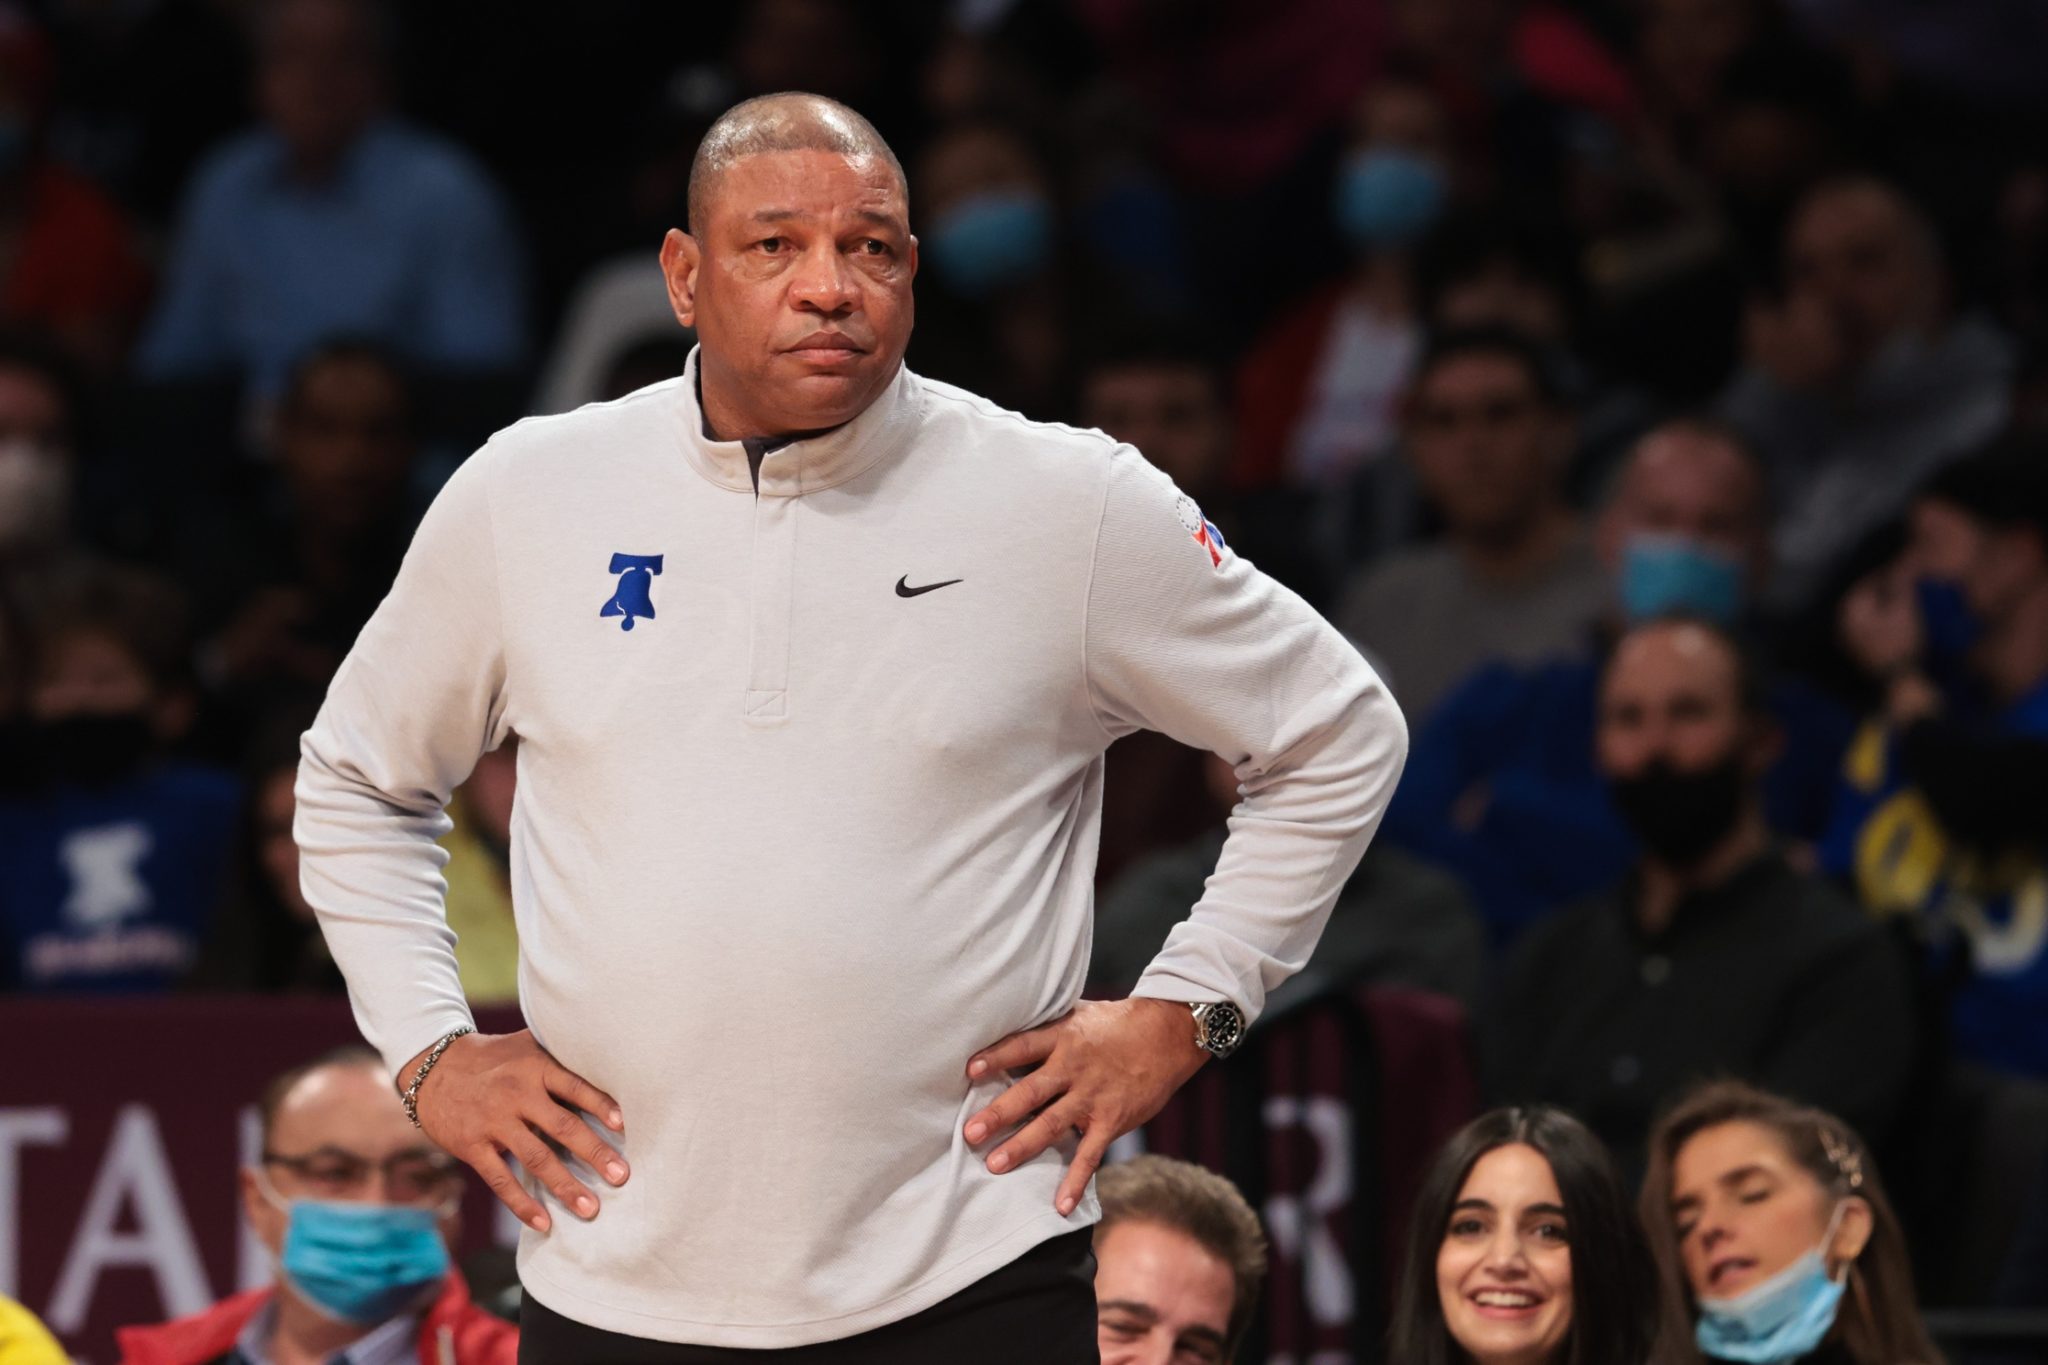 Doc Rivers Enters COVID Protocol, Dan Burke to Answer “Dumbass” Questions in his Stead